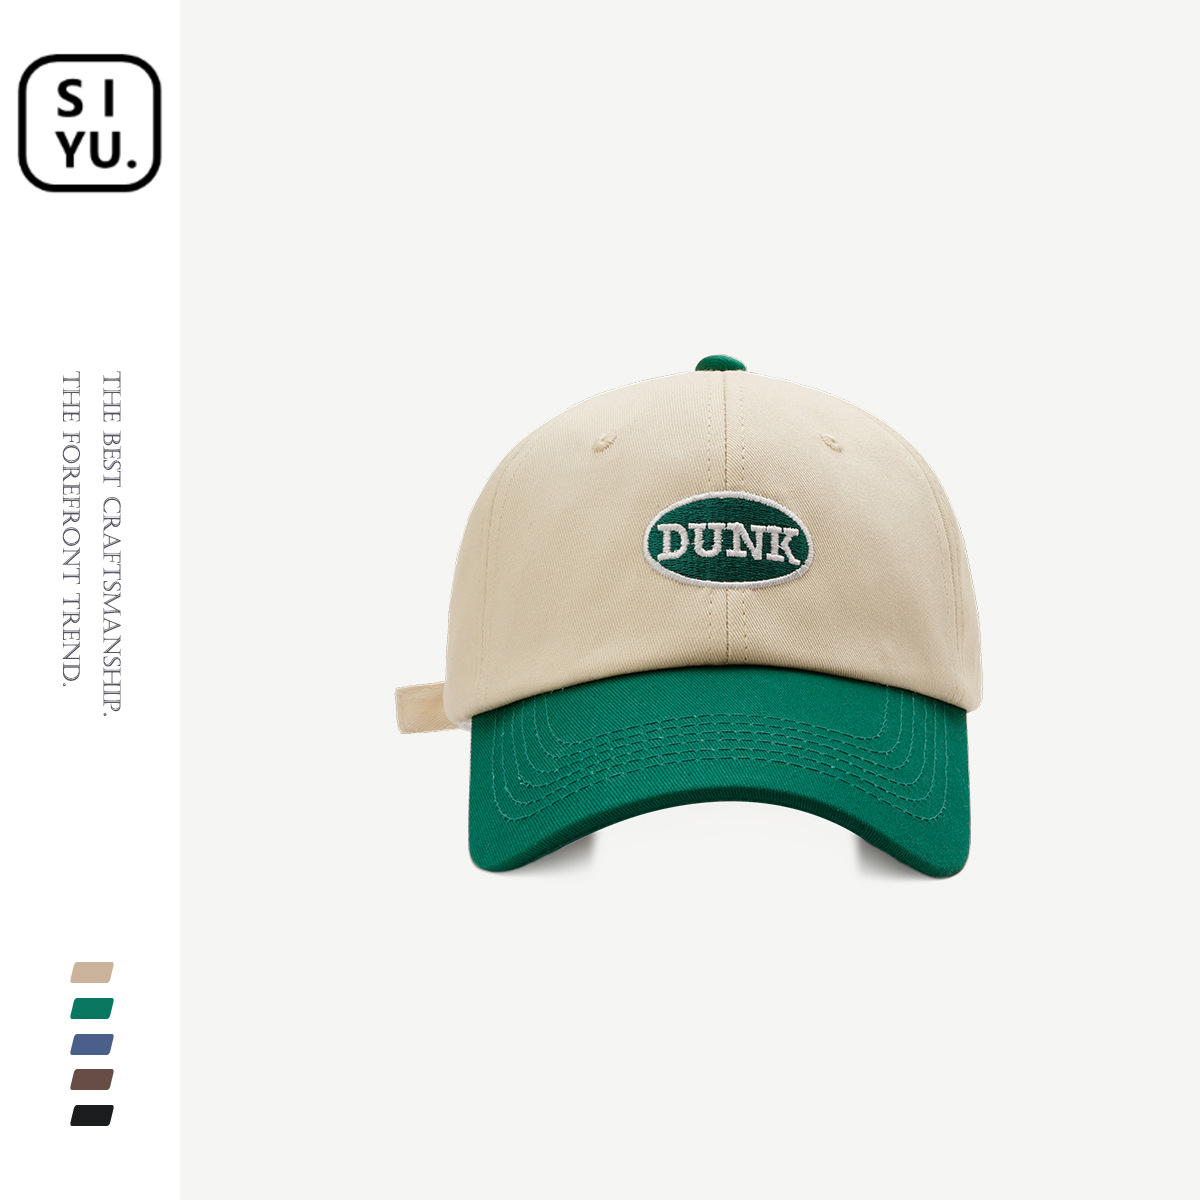 Ins Korean Special-Interest Fashion Brand Dunk Letter Splicing Baseball Cap Couple Street Shot Face Small Wide Brim Peaked Cap Female